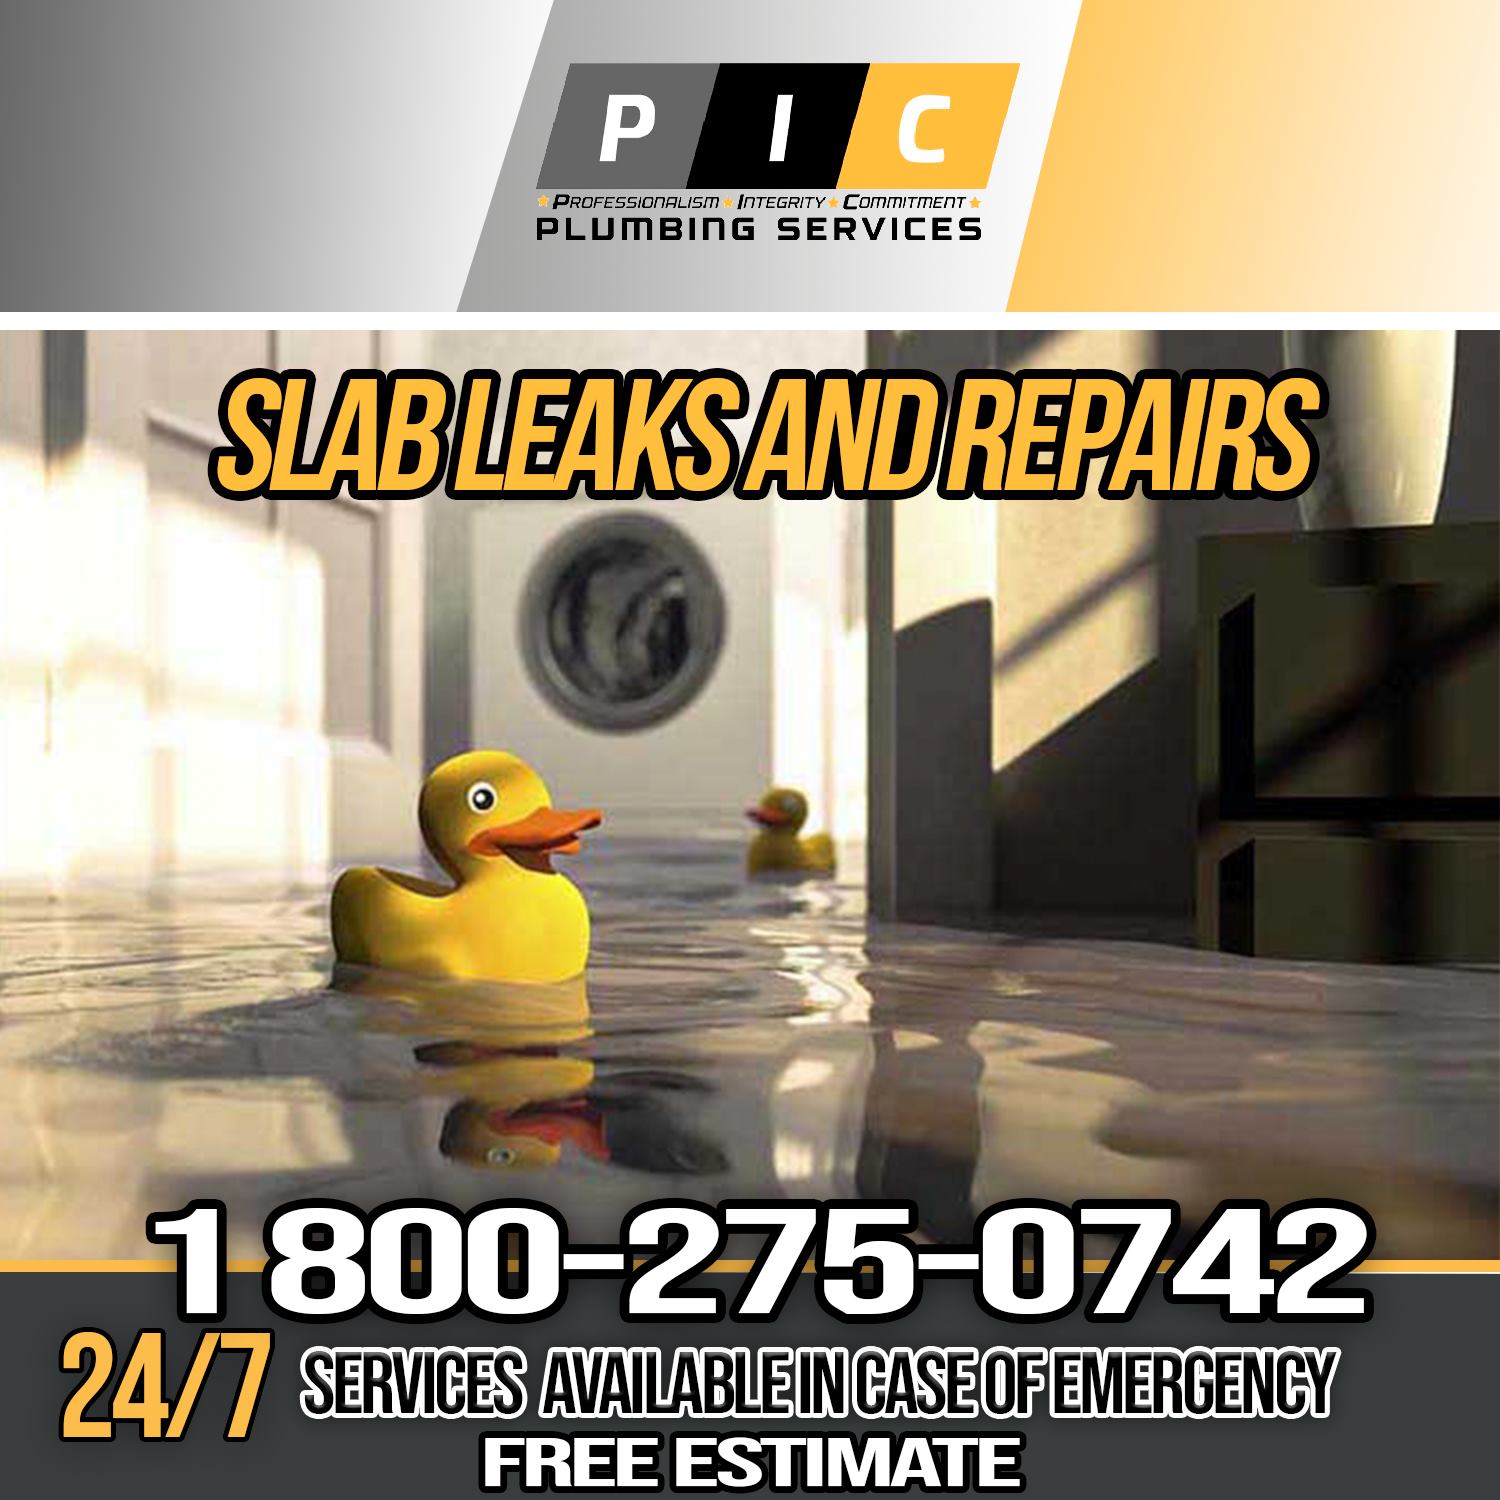 Image For Post | Any kind of leak can prove to be drastic for your house, including the slab leaks. At PIC Plumbing, we have some of the best plumbers in San Diego who have expertise in all kind of repairing slab leaks and detecting them. Give us a call today at PIC Plumbing for Slab leak detection in San Diego.
https://picplumbing.com/plumber/slab-leaks/